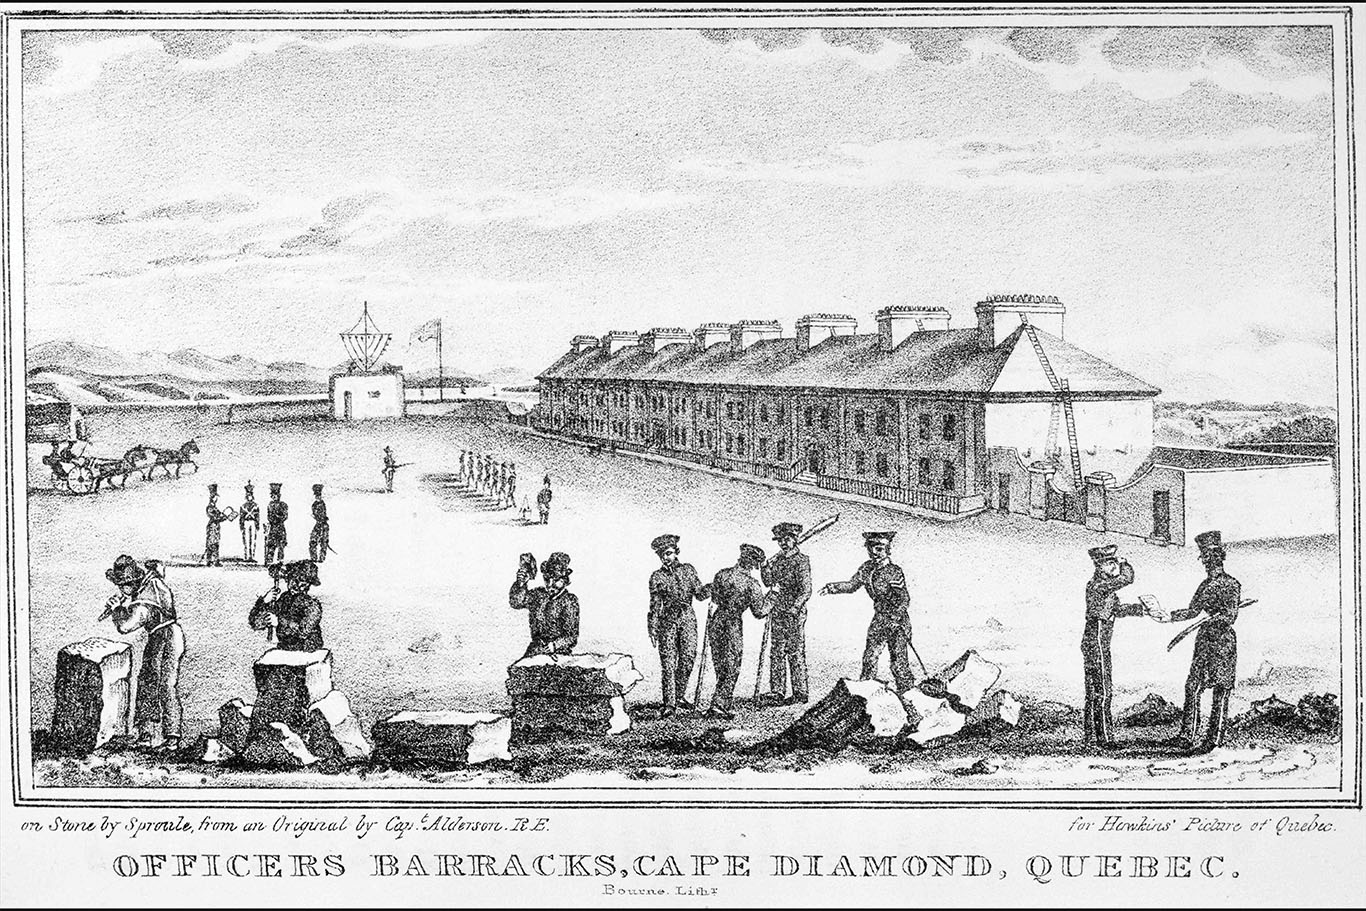 Etching of the Officer’s Barracks, 1834